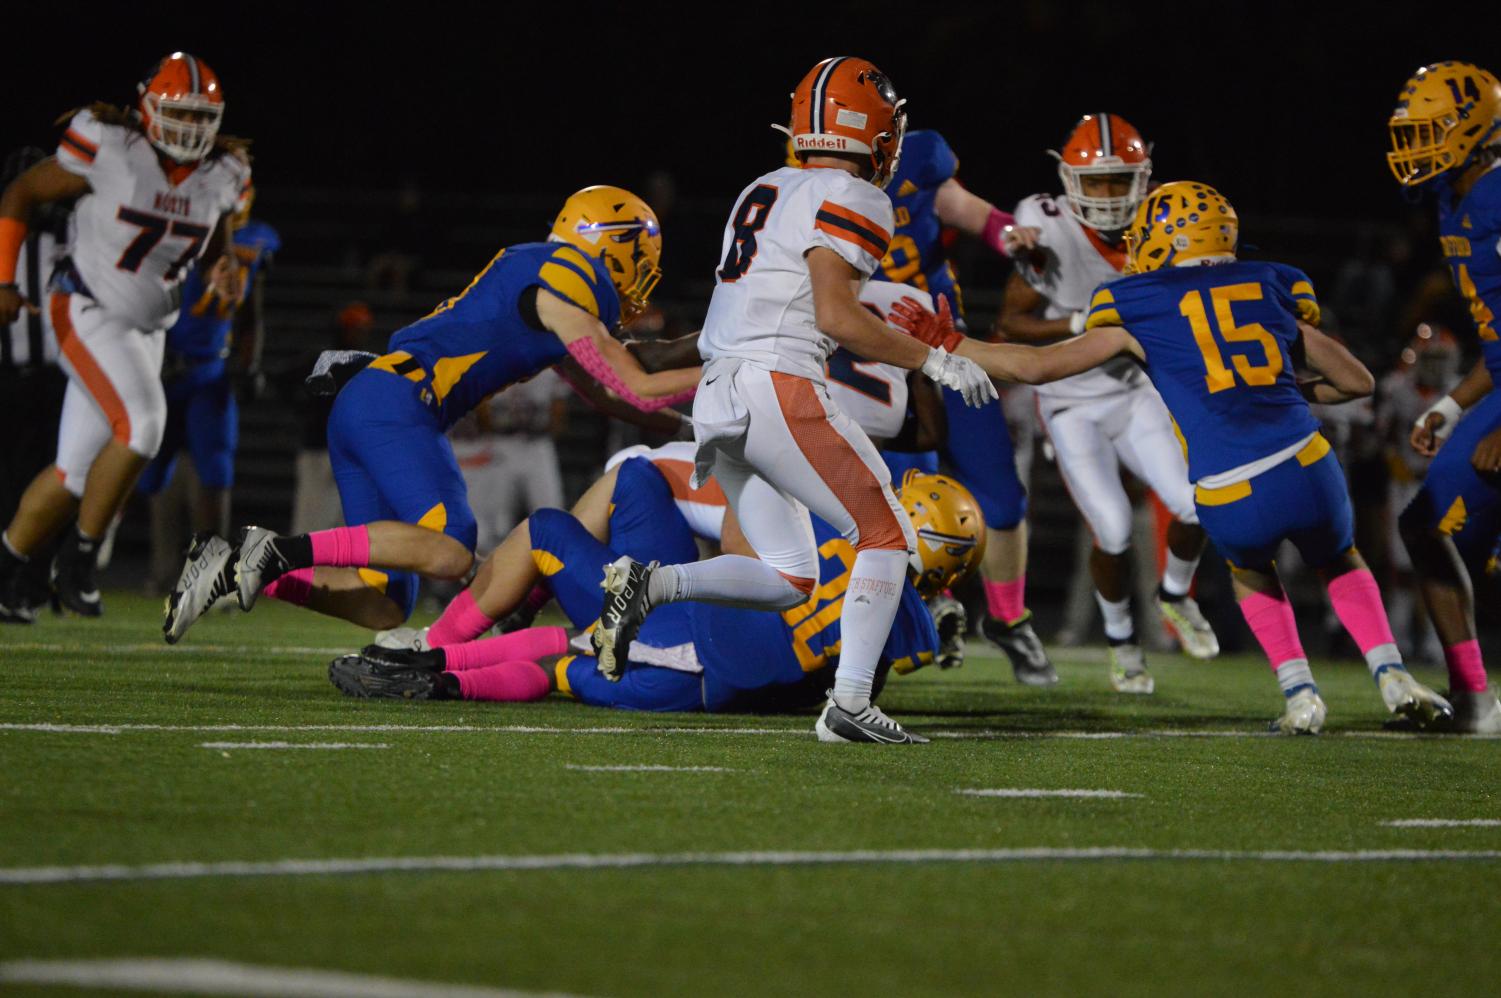 Stafford+Indians+lose+21-14+to+the+North+Stafford+Wolverines.+Homecoming+Game+Photos.